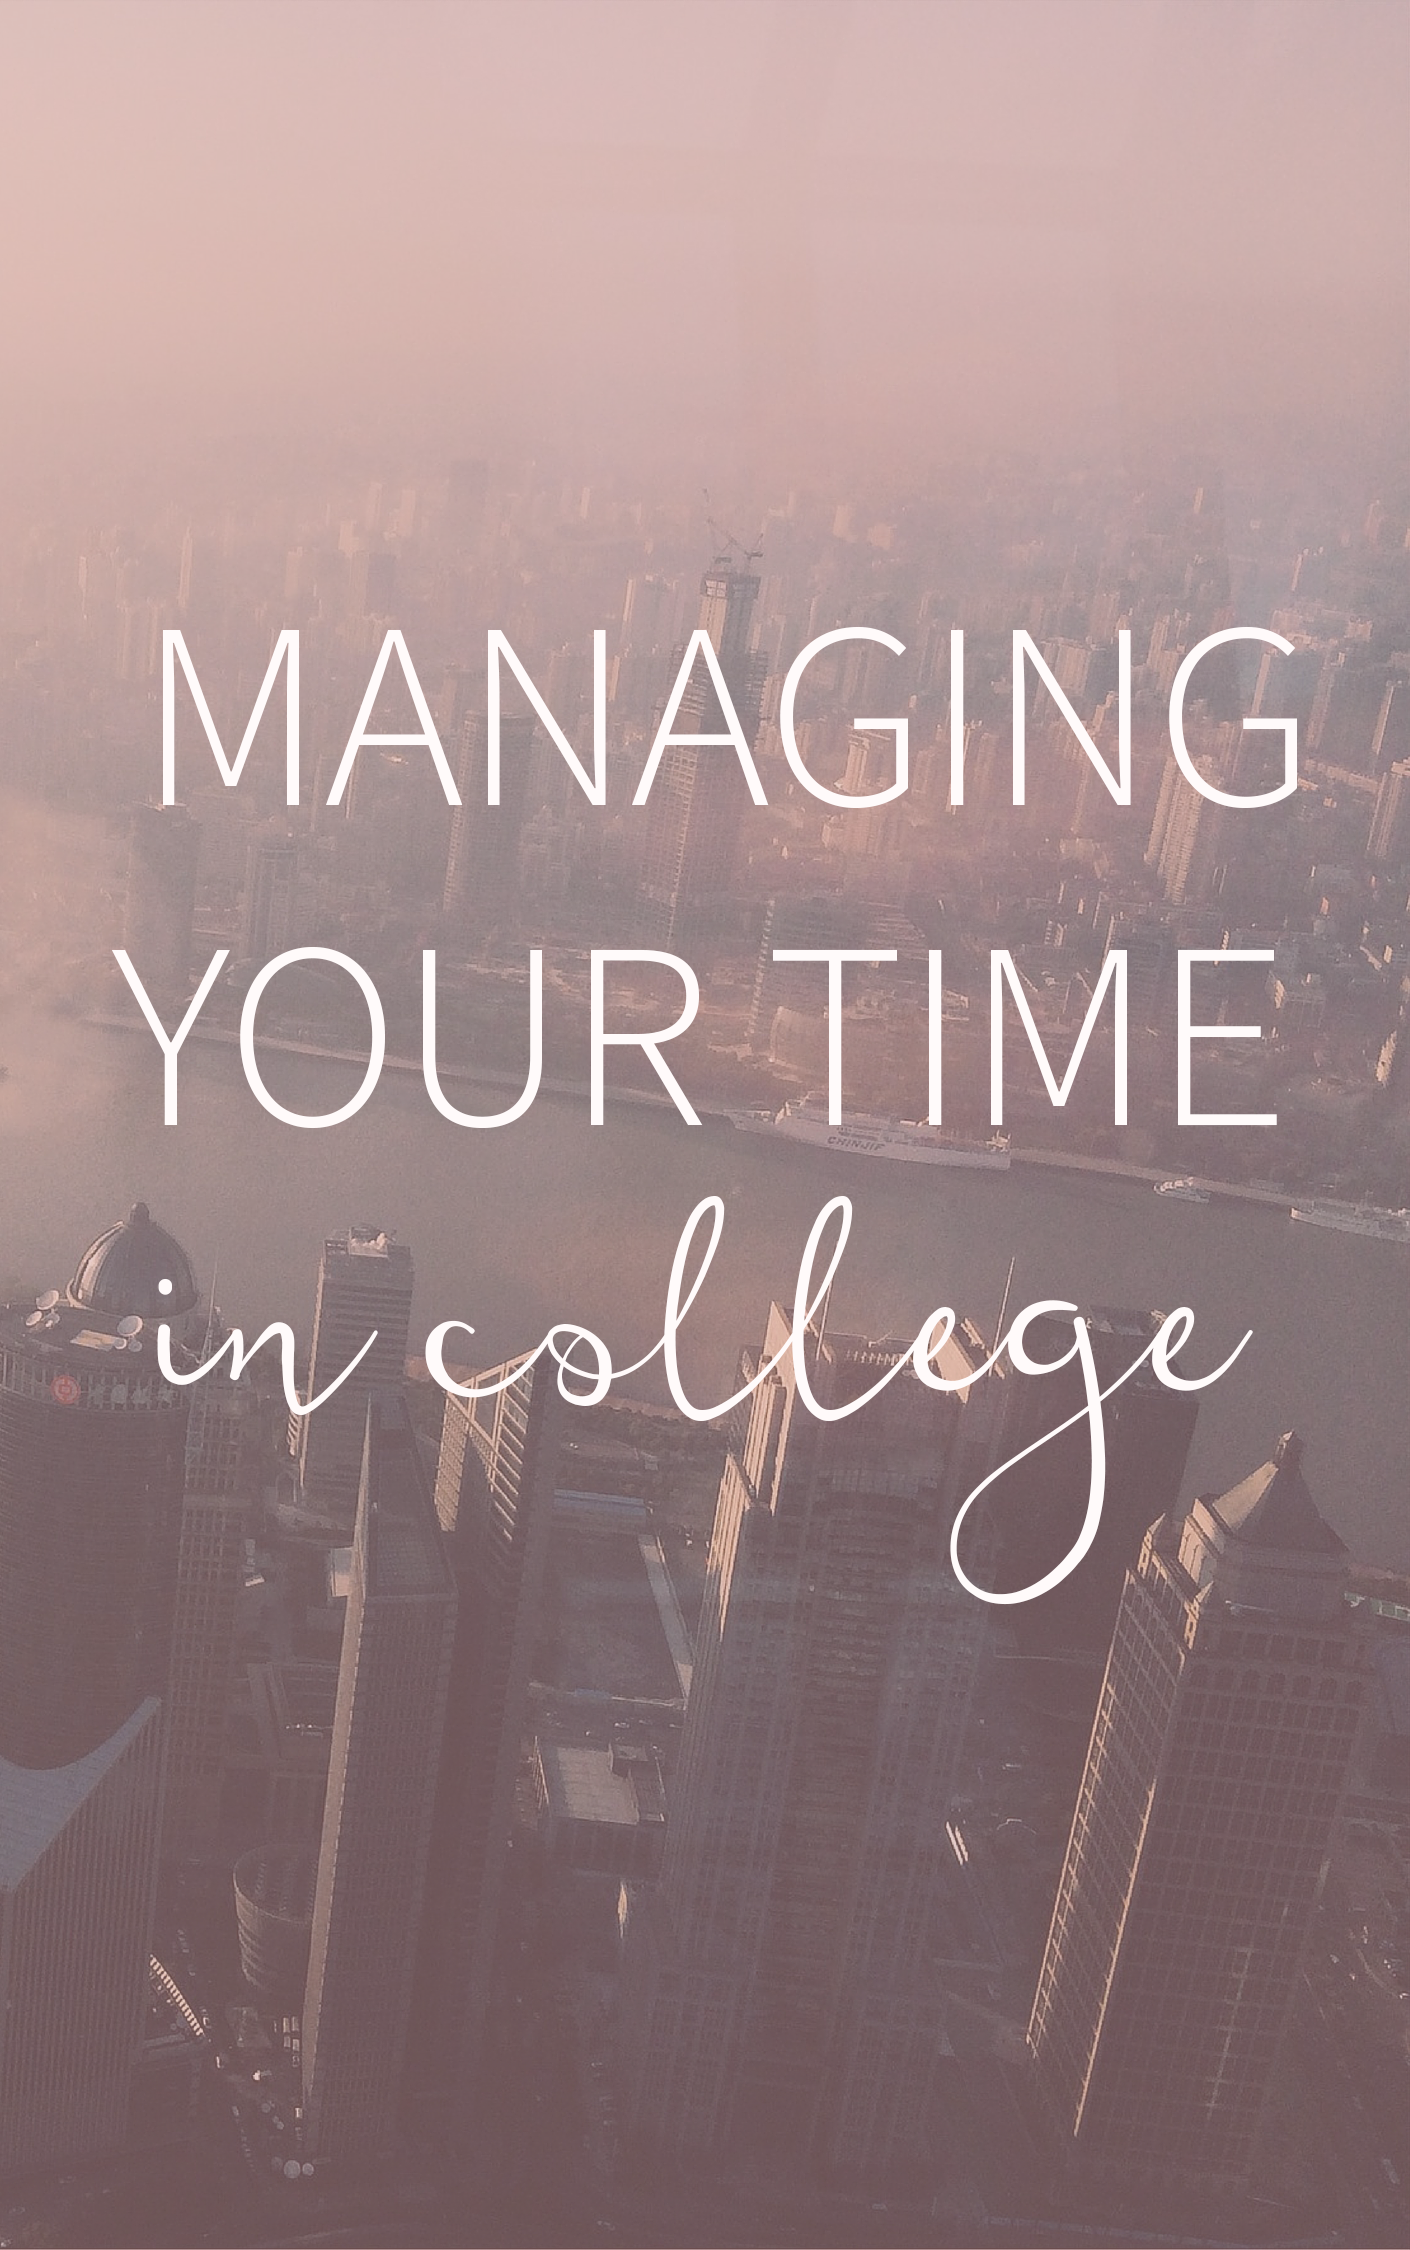 Managing your time